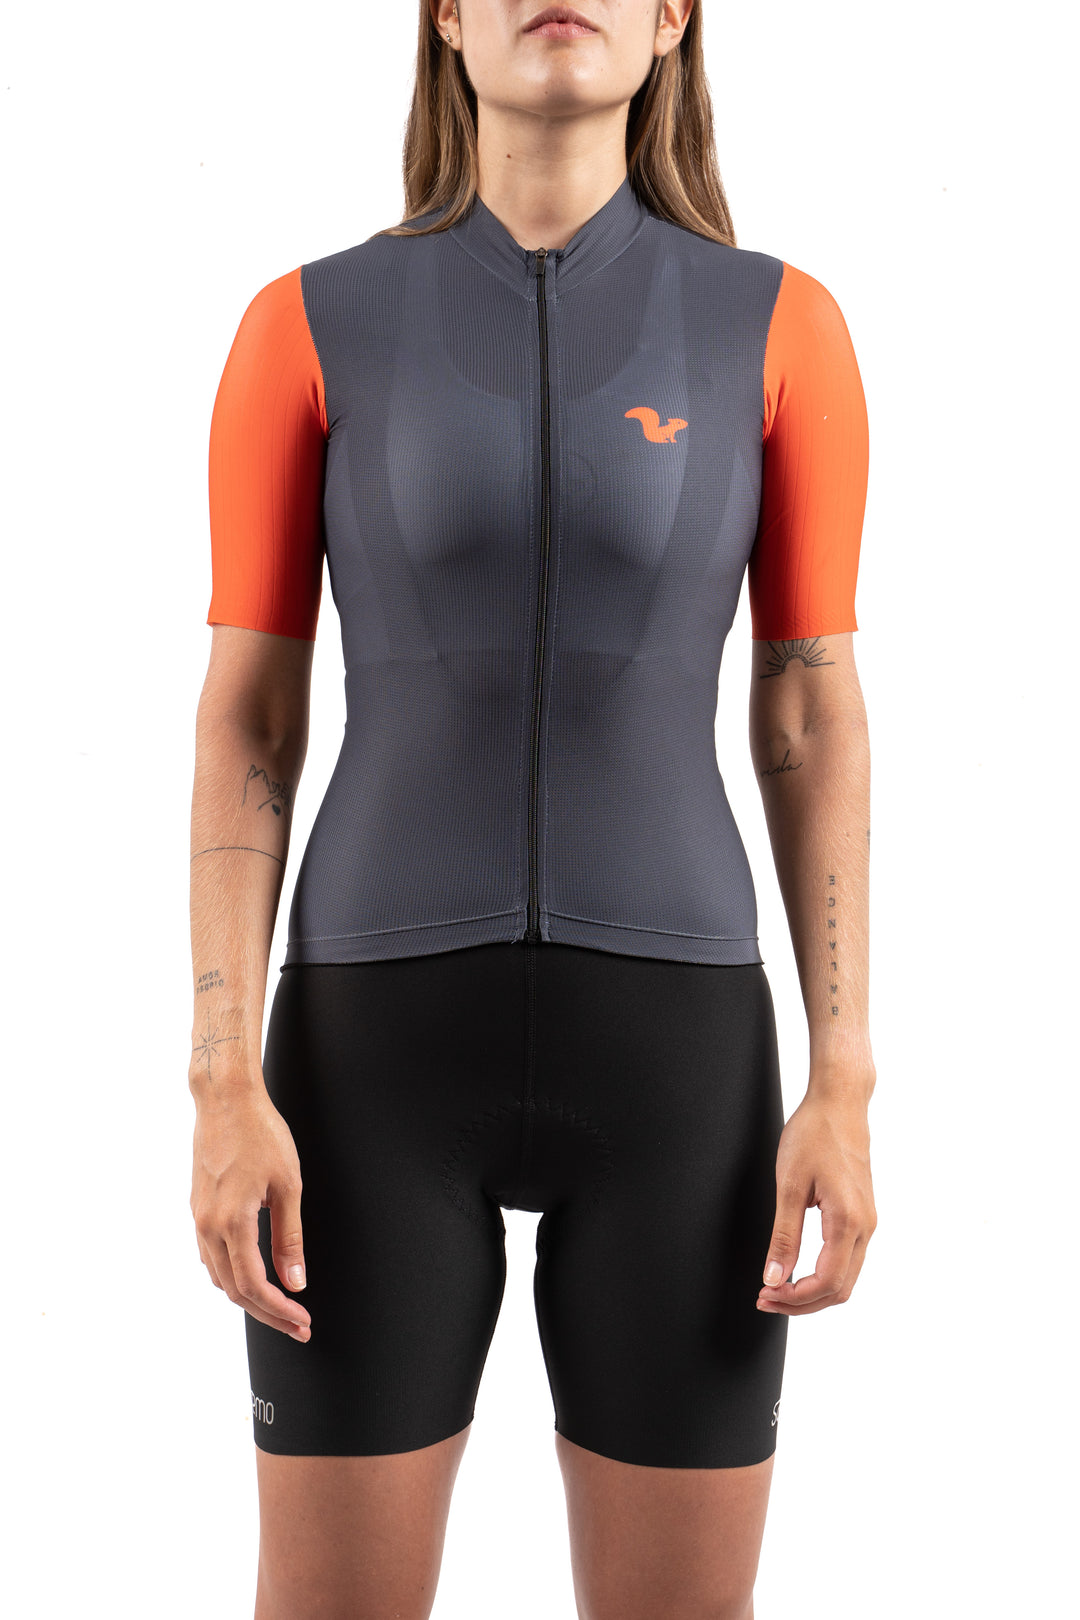 Jersey Corsa Grey Red  - Mujer